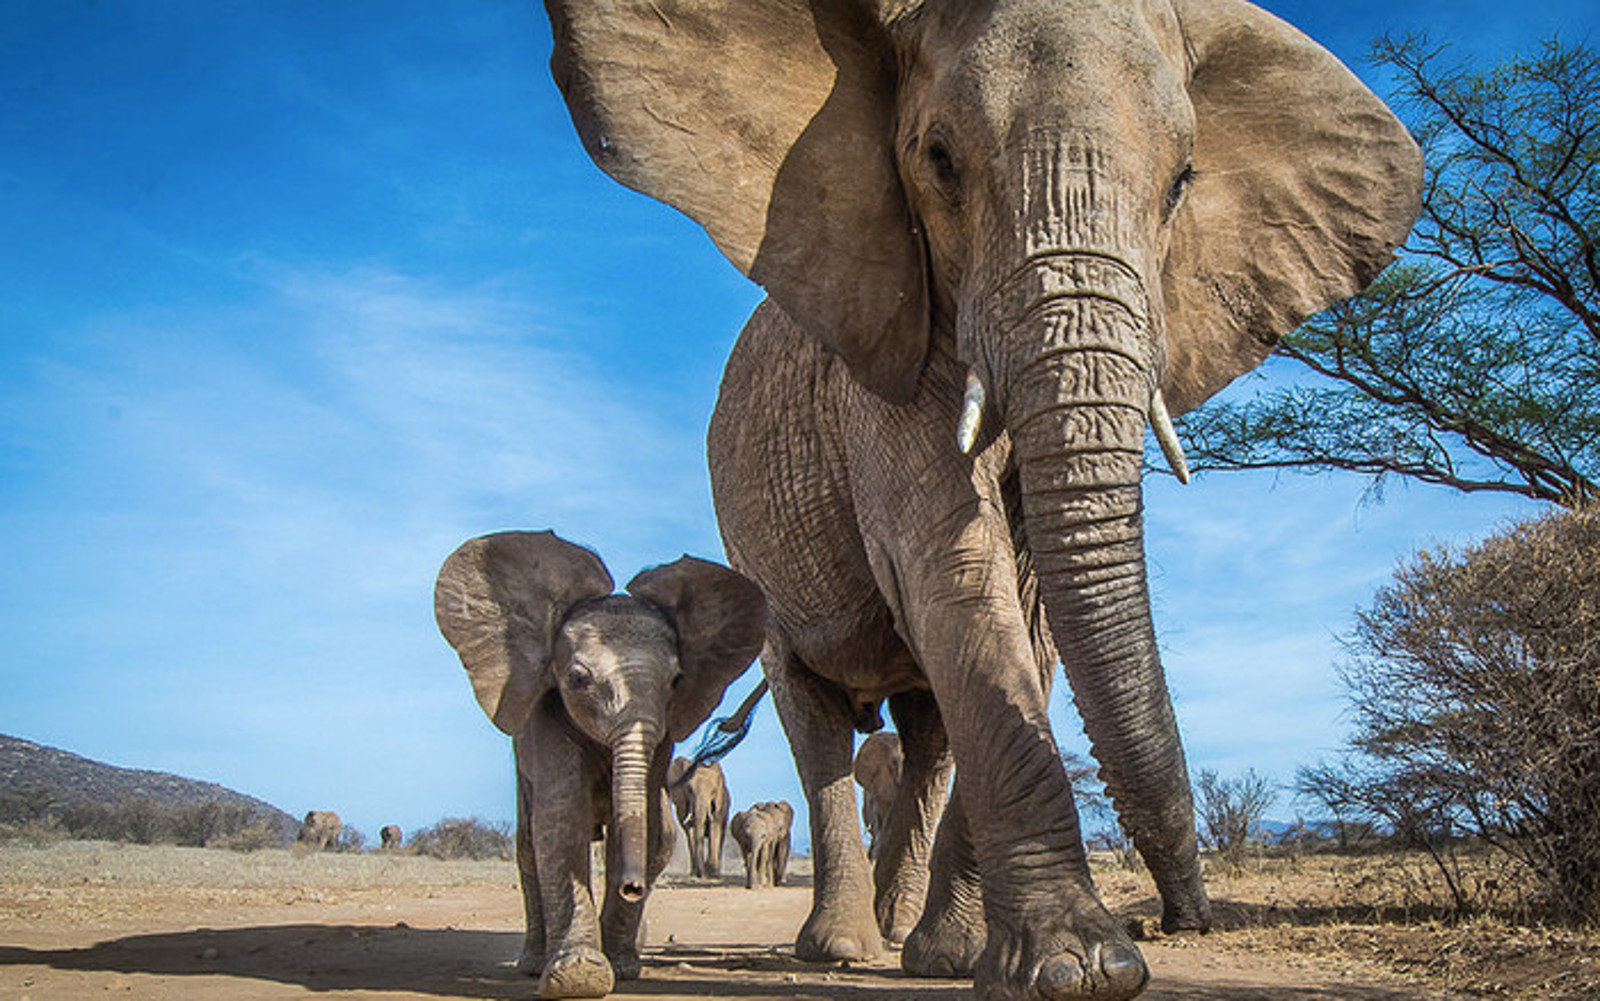 What We've Learned From Elephants After Years of Documenting Them in the Wild